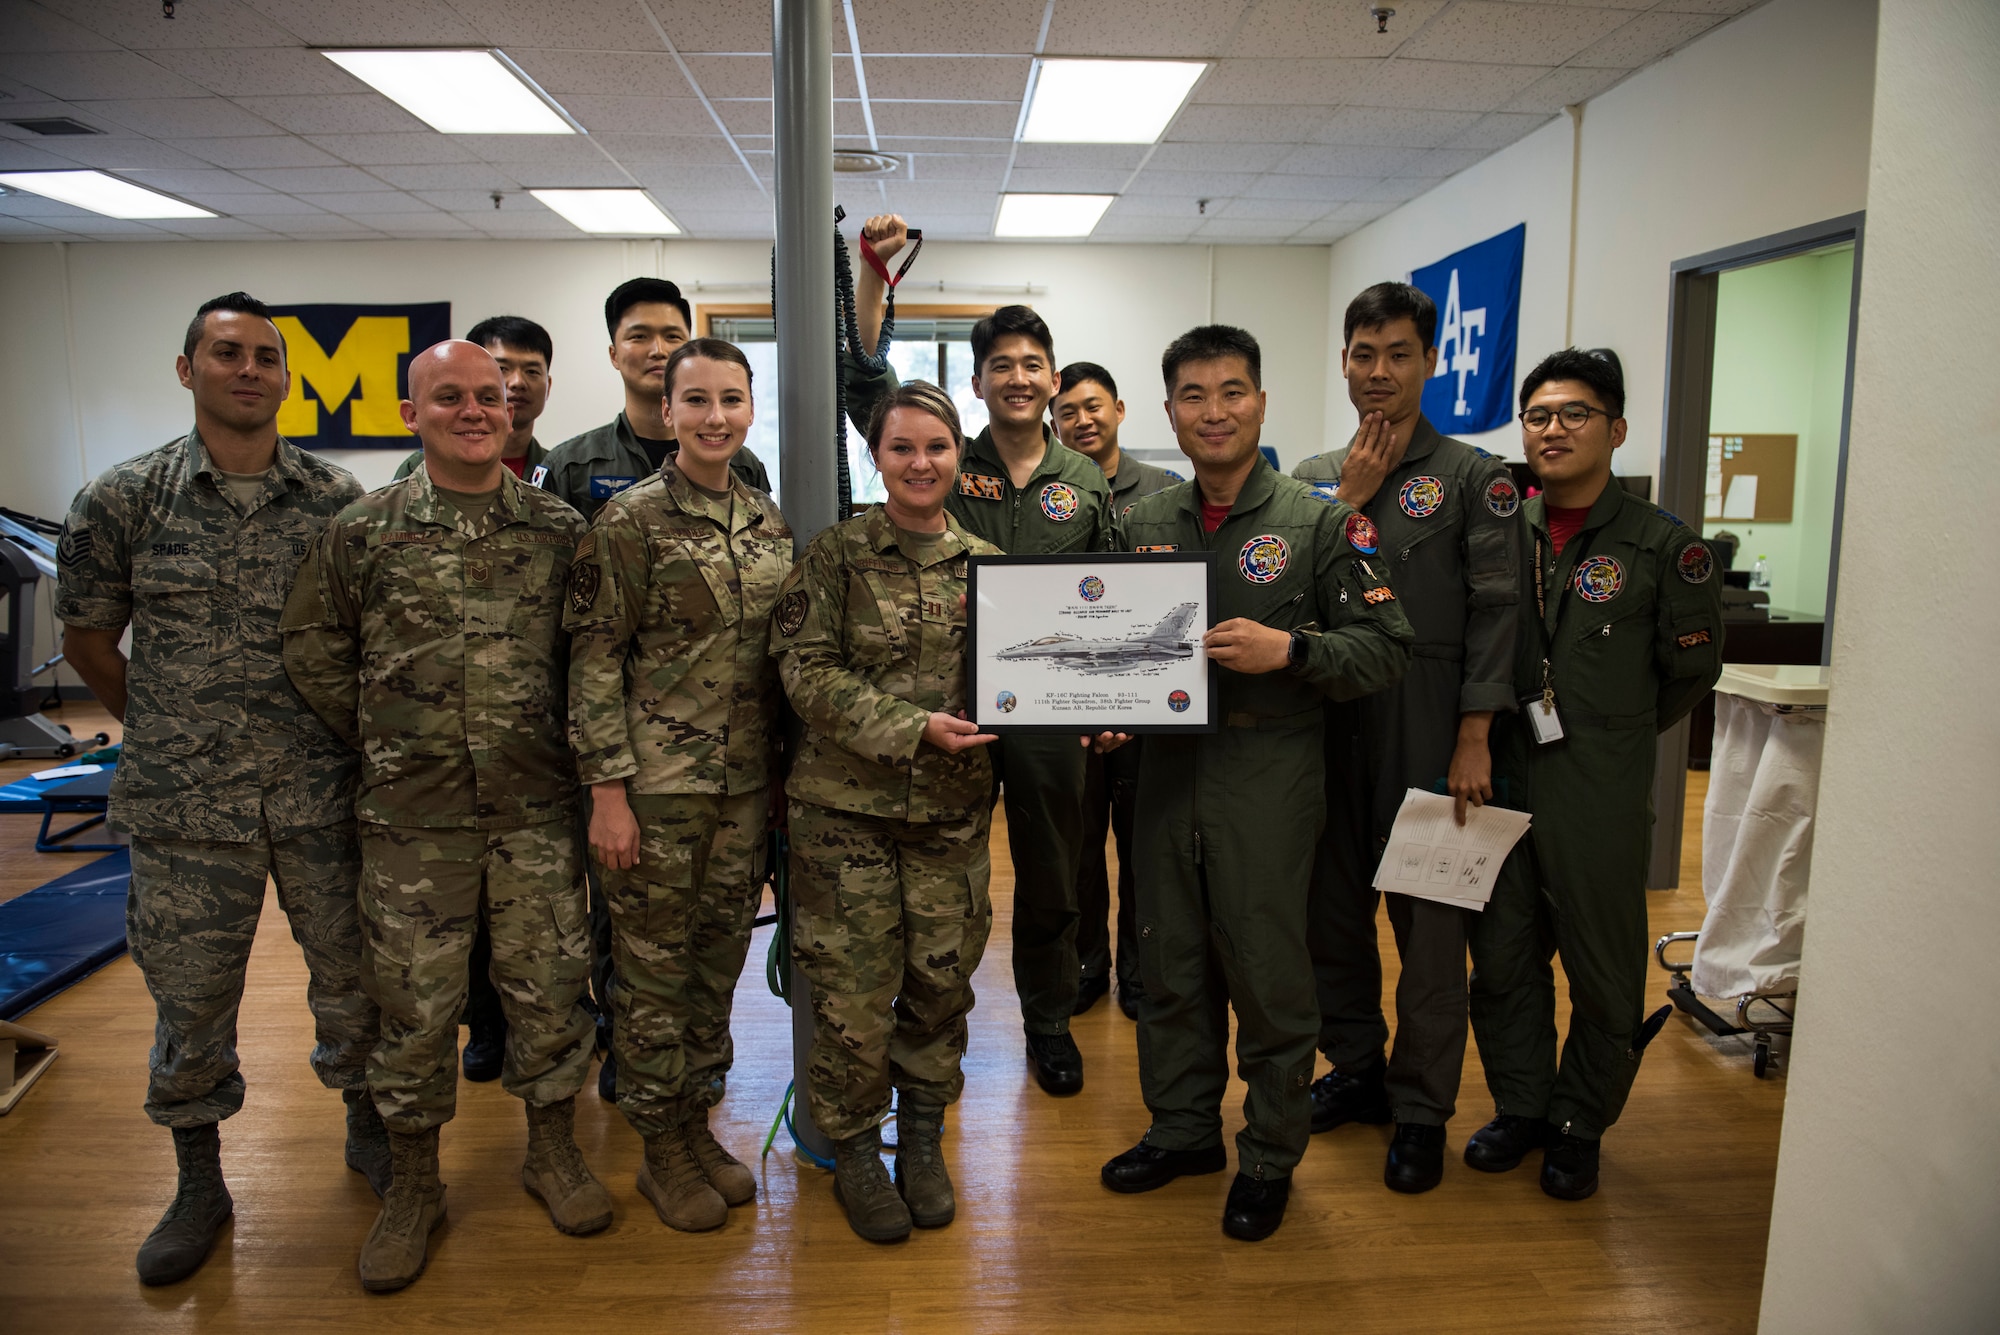 The 8th Medical Operations Squadron physical therapy flight poses with a picture with pilots from the Republic of Korea Air Force’s 111th Fighter Squadron after a training session at Kunsan Air Base, Republic of Korea, Aug. 09, 2019. The 8th MDOS physical therapy flight taught the 111th FS pilots how to perform various stretches and exercises to alleviate pain and discomfort they were having. (U.S. Air Force photo by Senior Airman Stefan Alvarez)